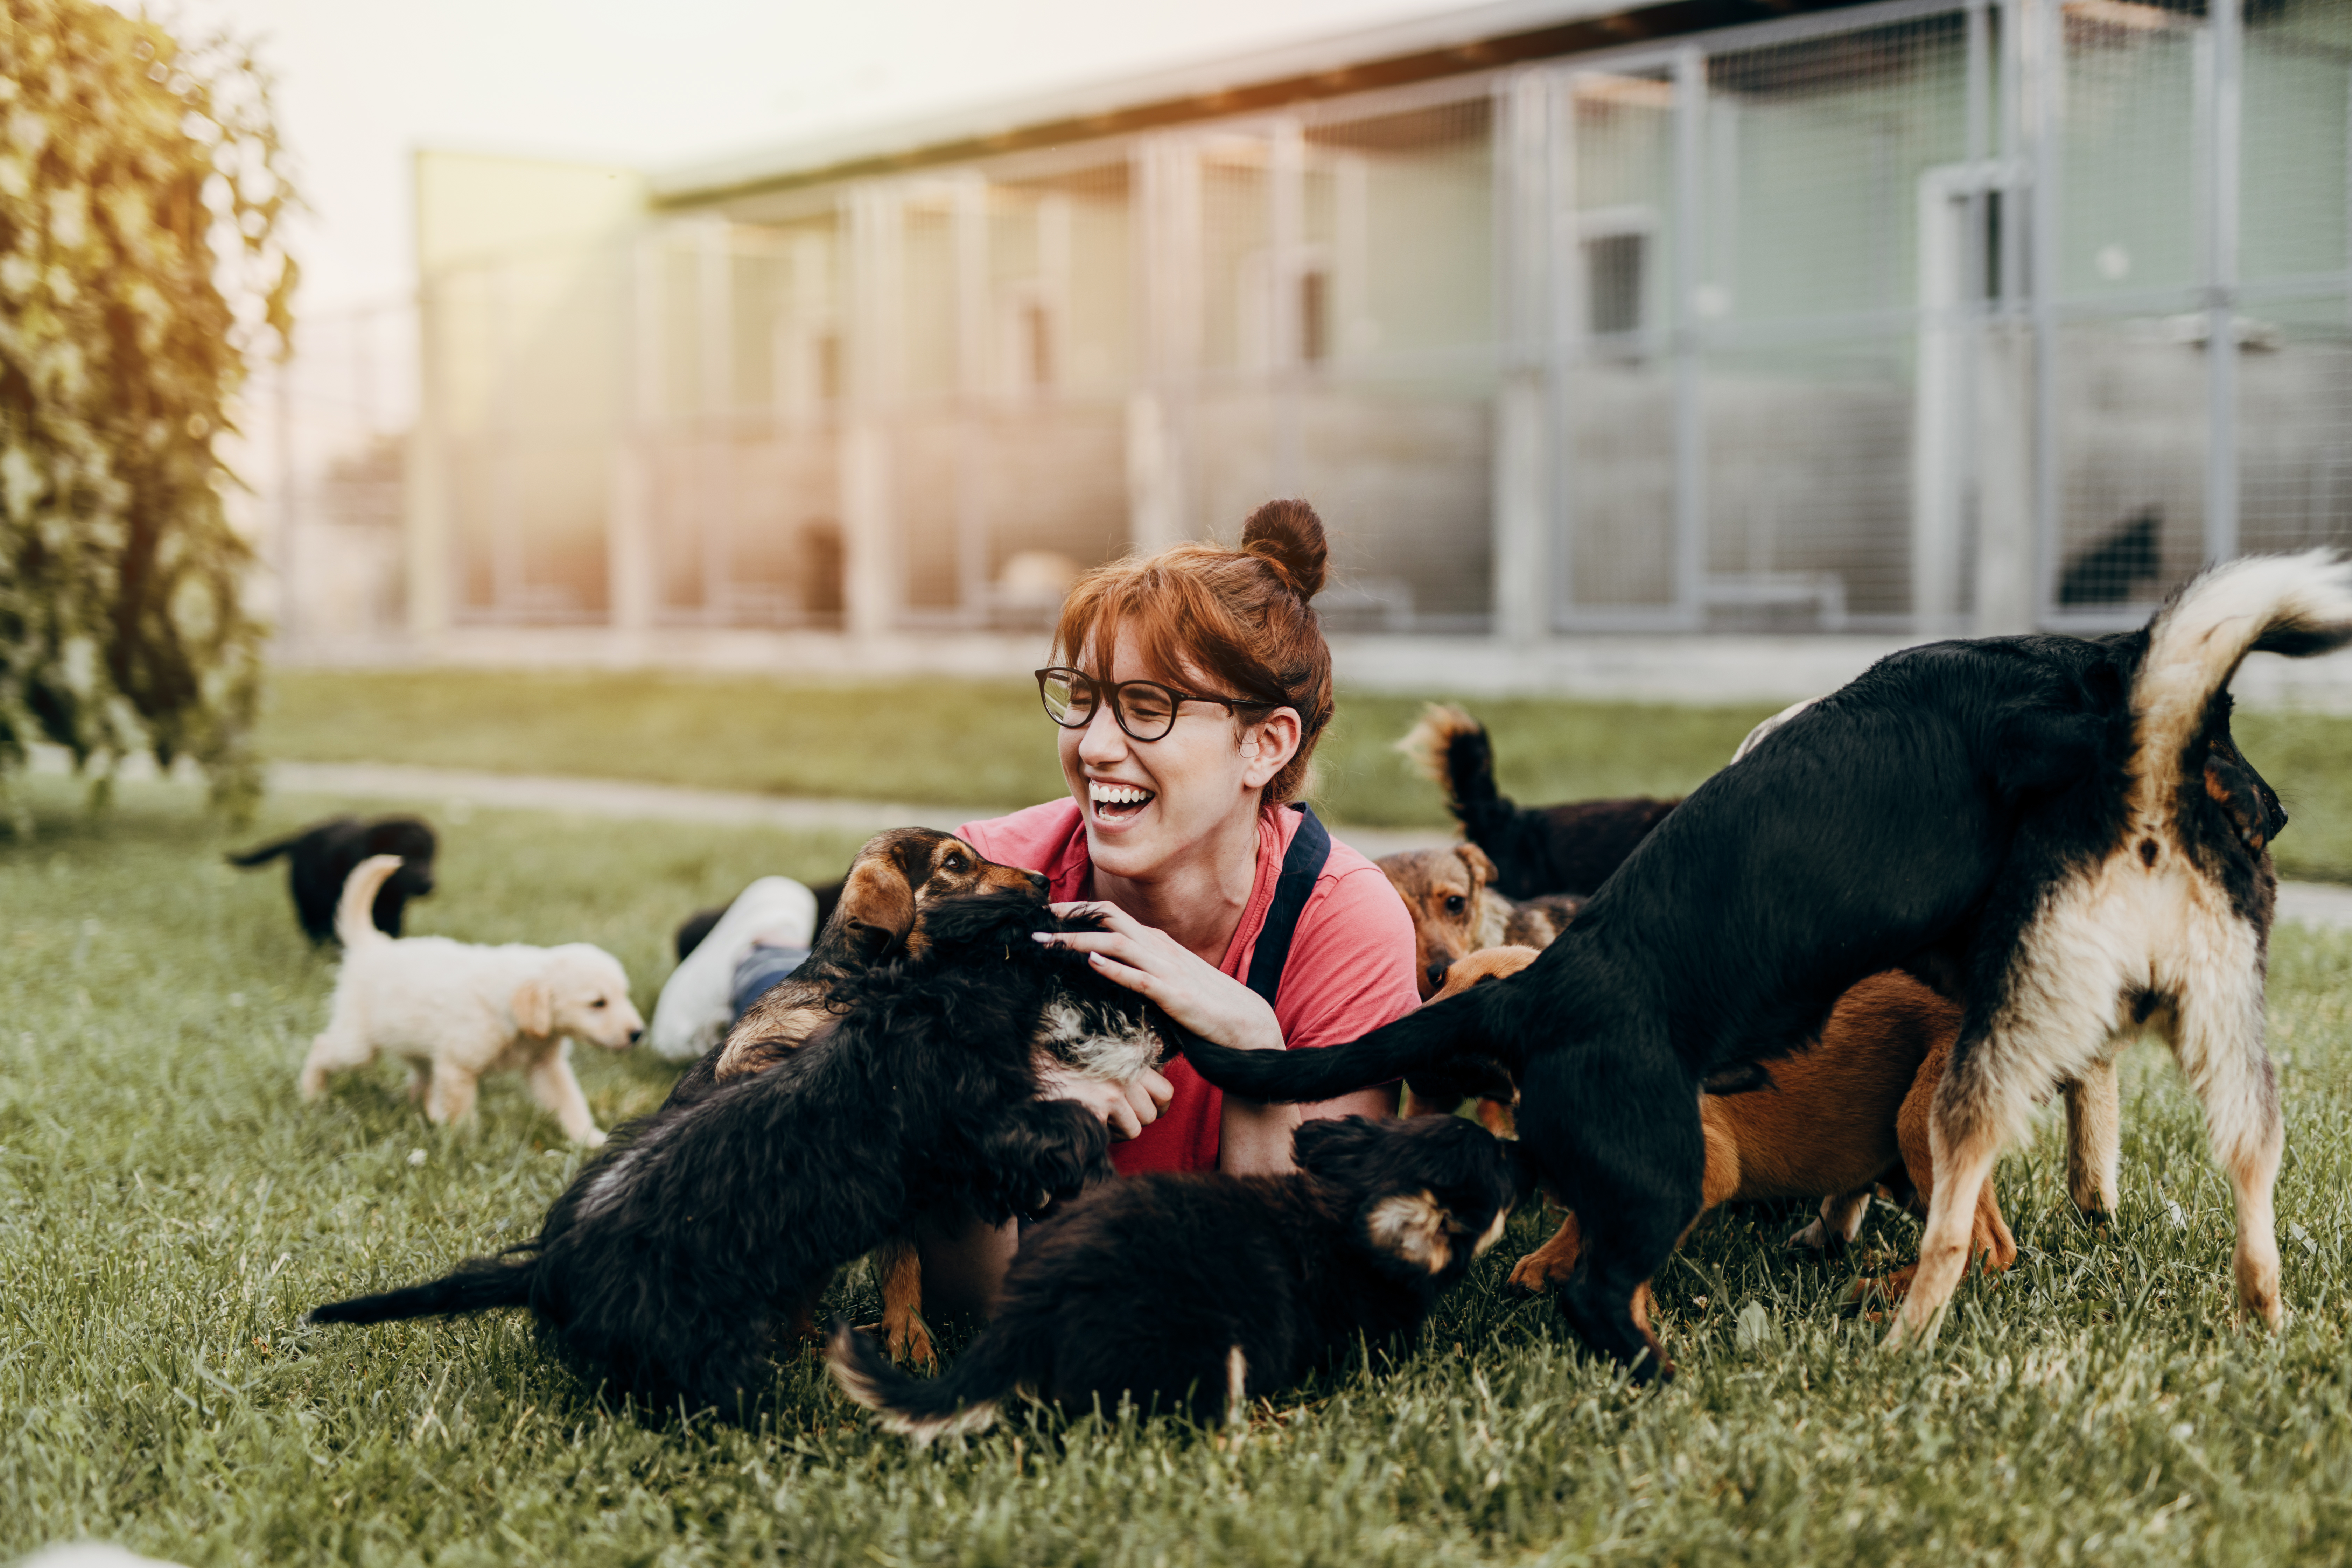 Women surrounded by shelter dogs